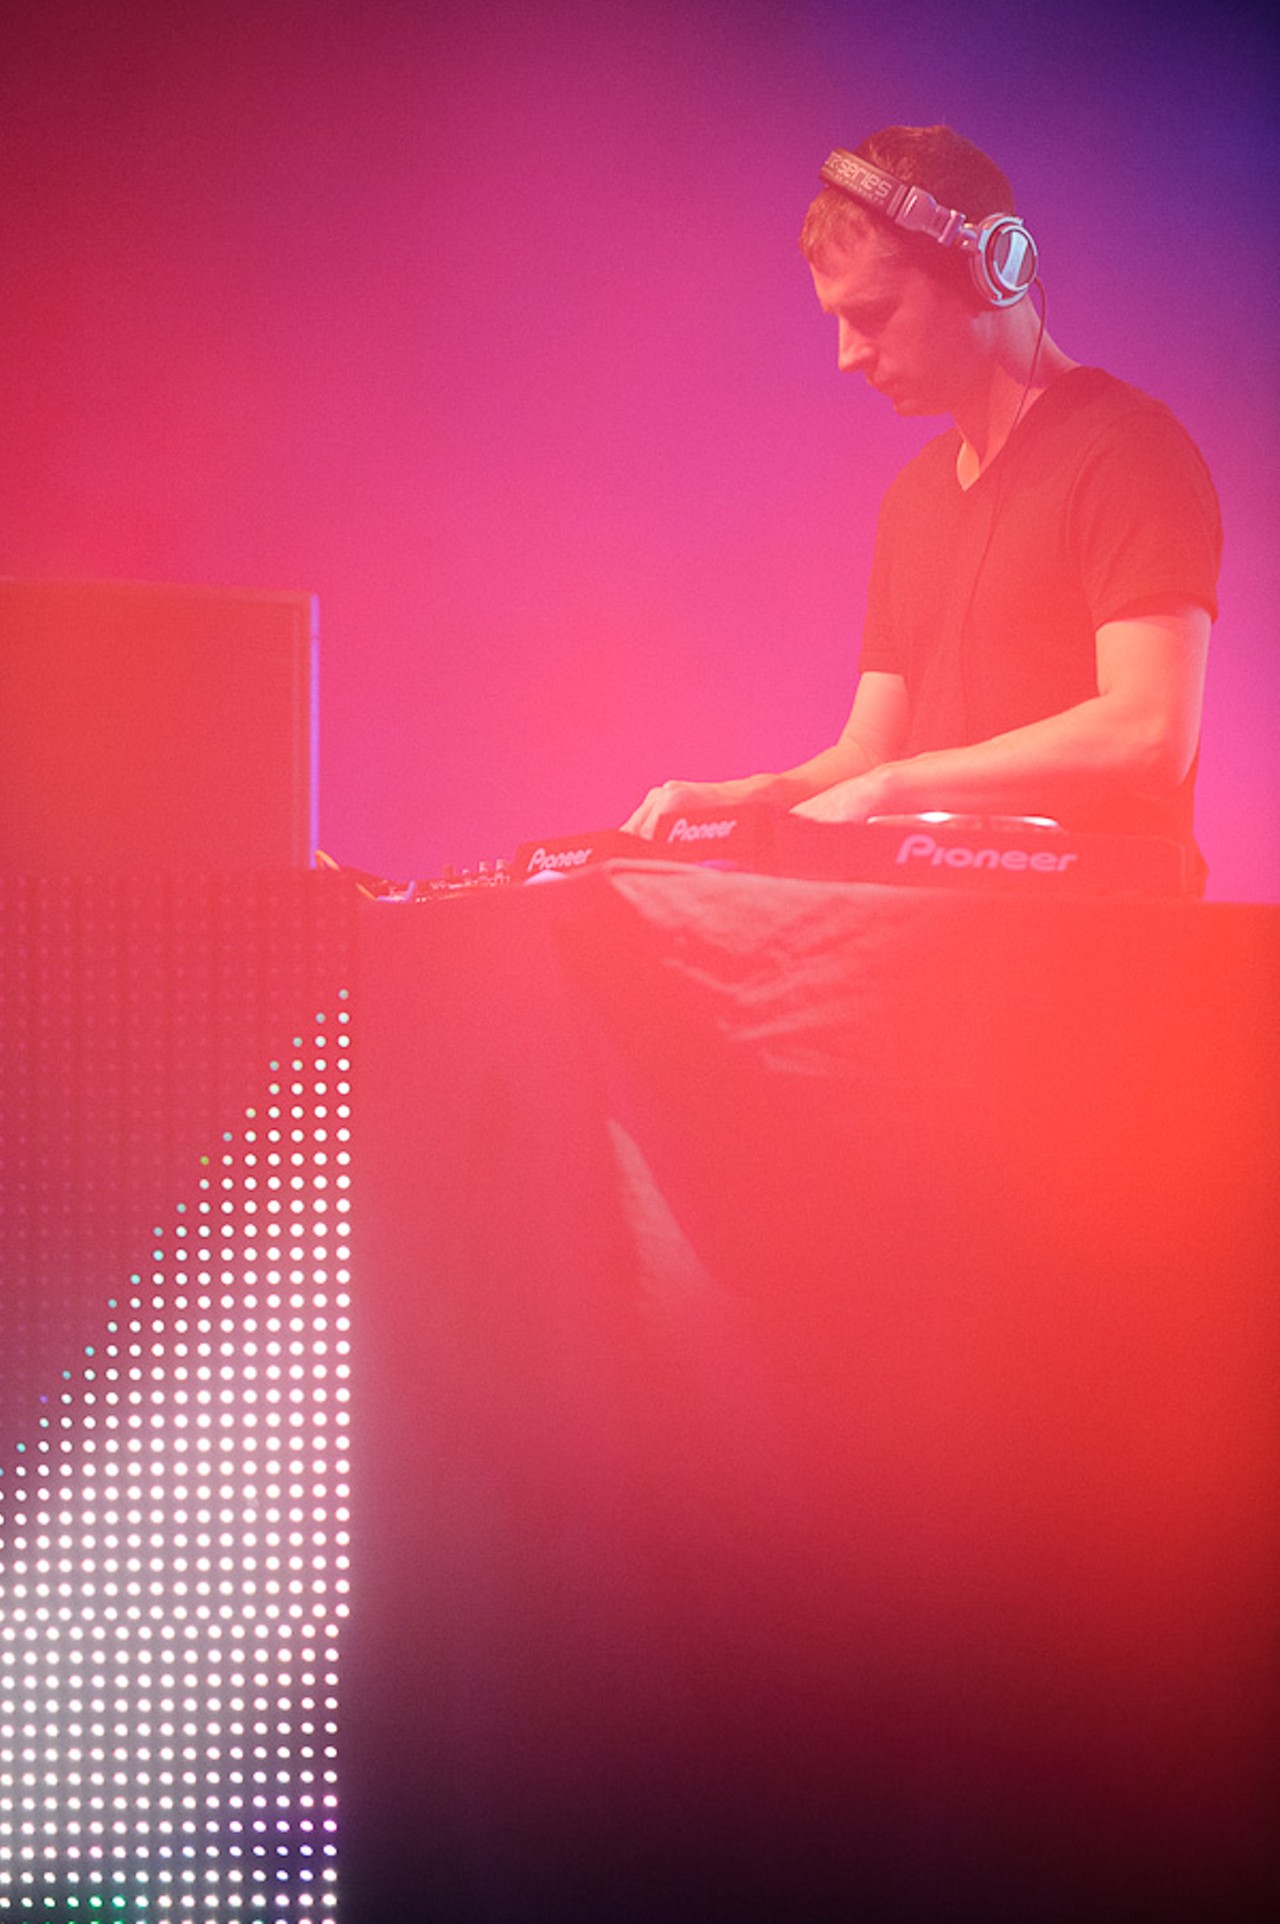 DJ Rob Lemon opening for AVICII at The Pageant in St. Louis, Missouri on January 10, 2012.